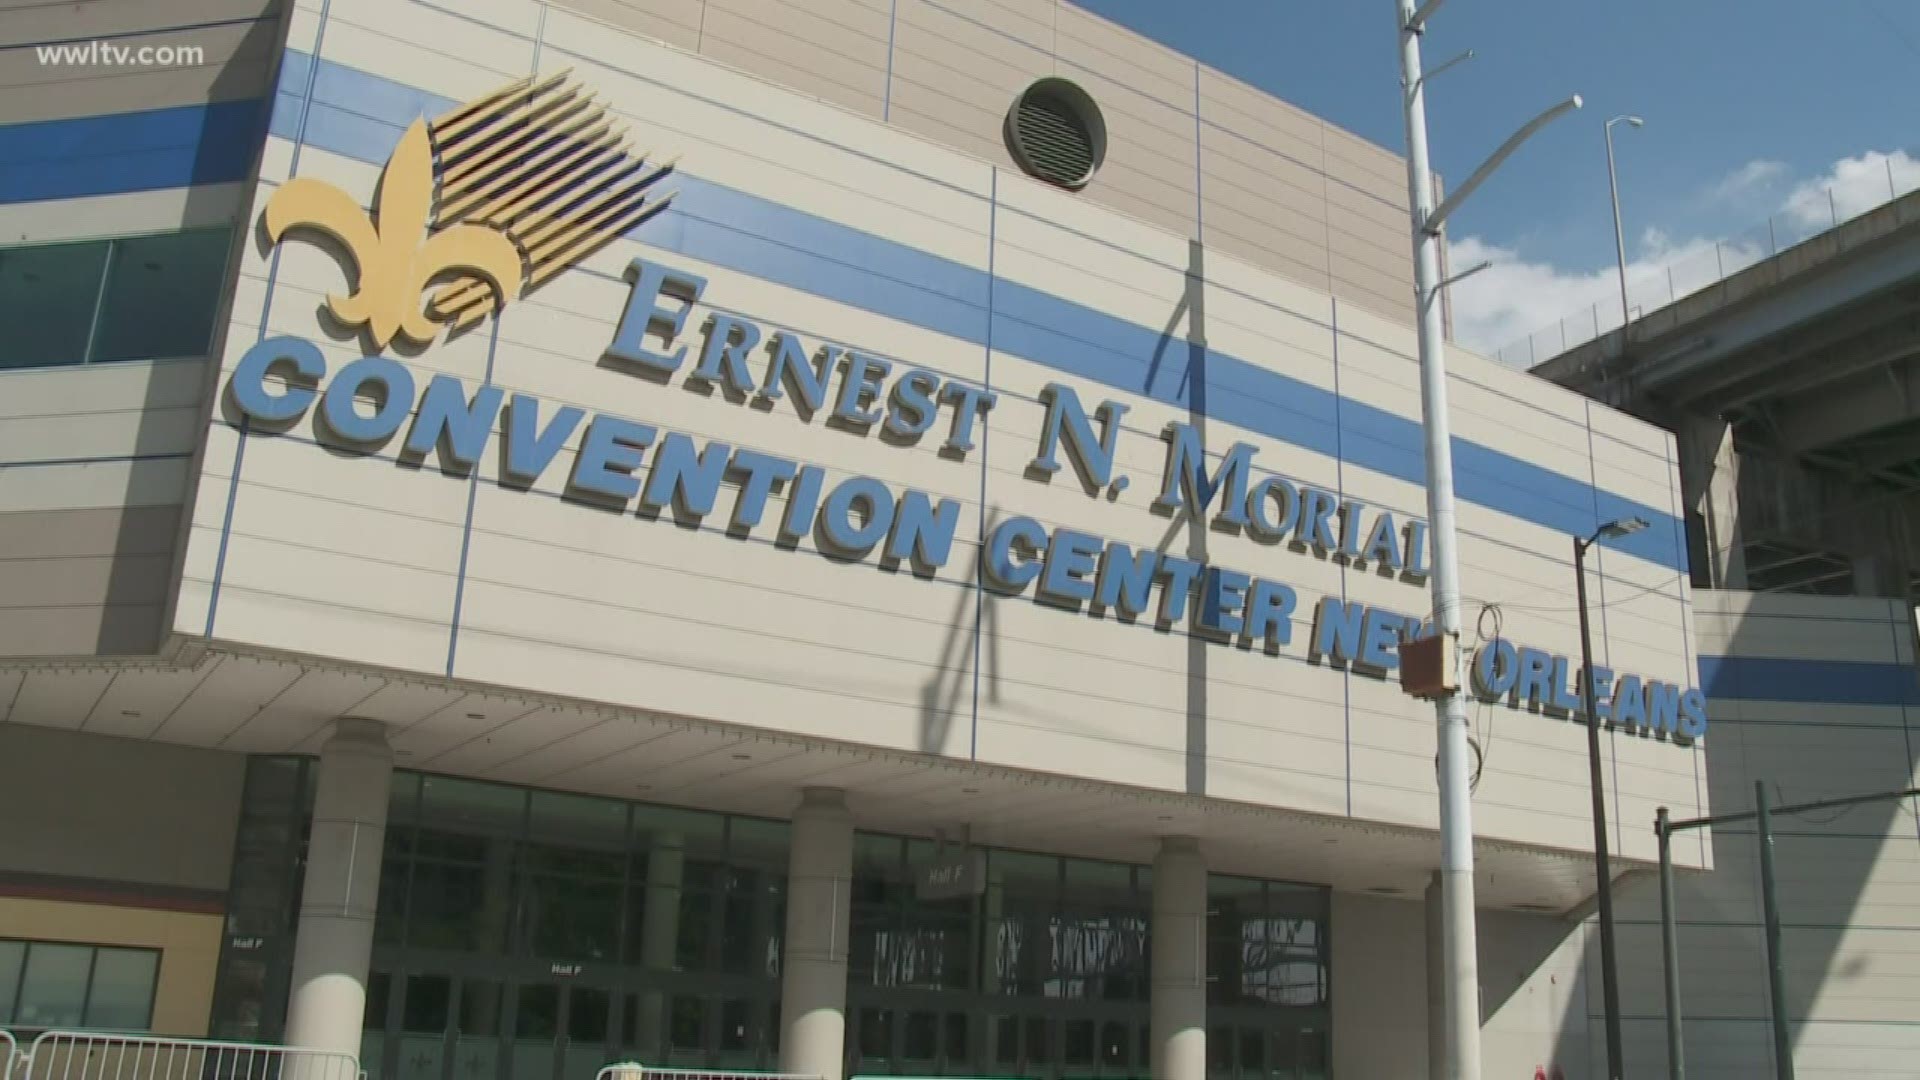 1,000 beds are being added to the convention center with the capacity to add more if needed.